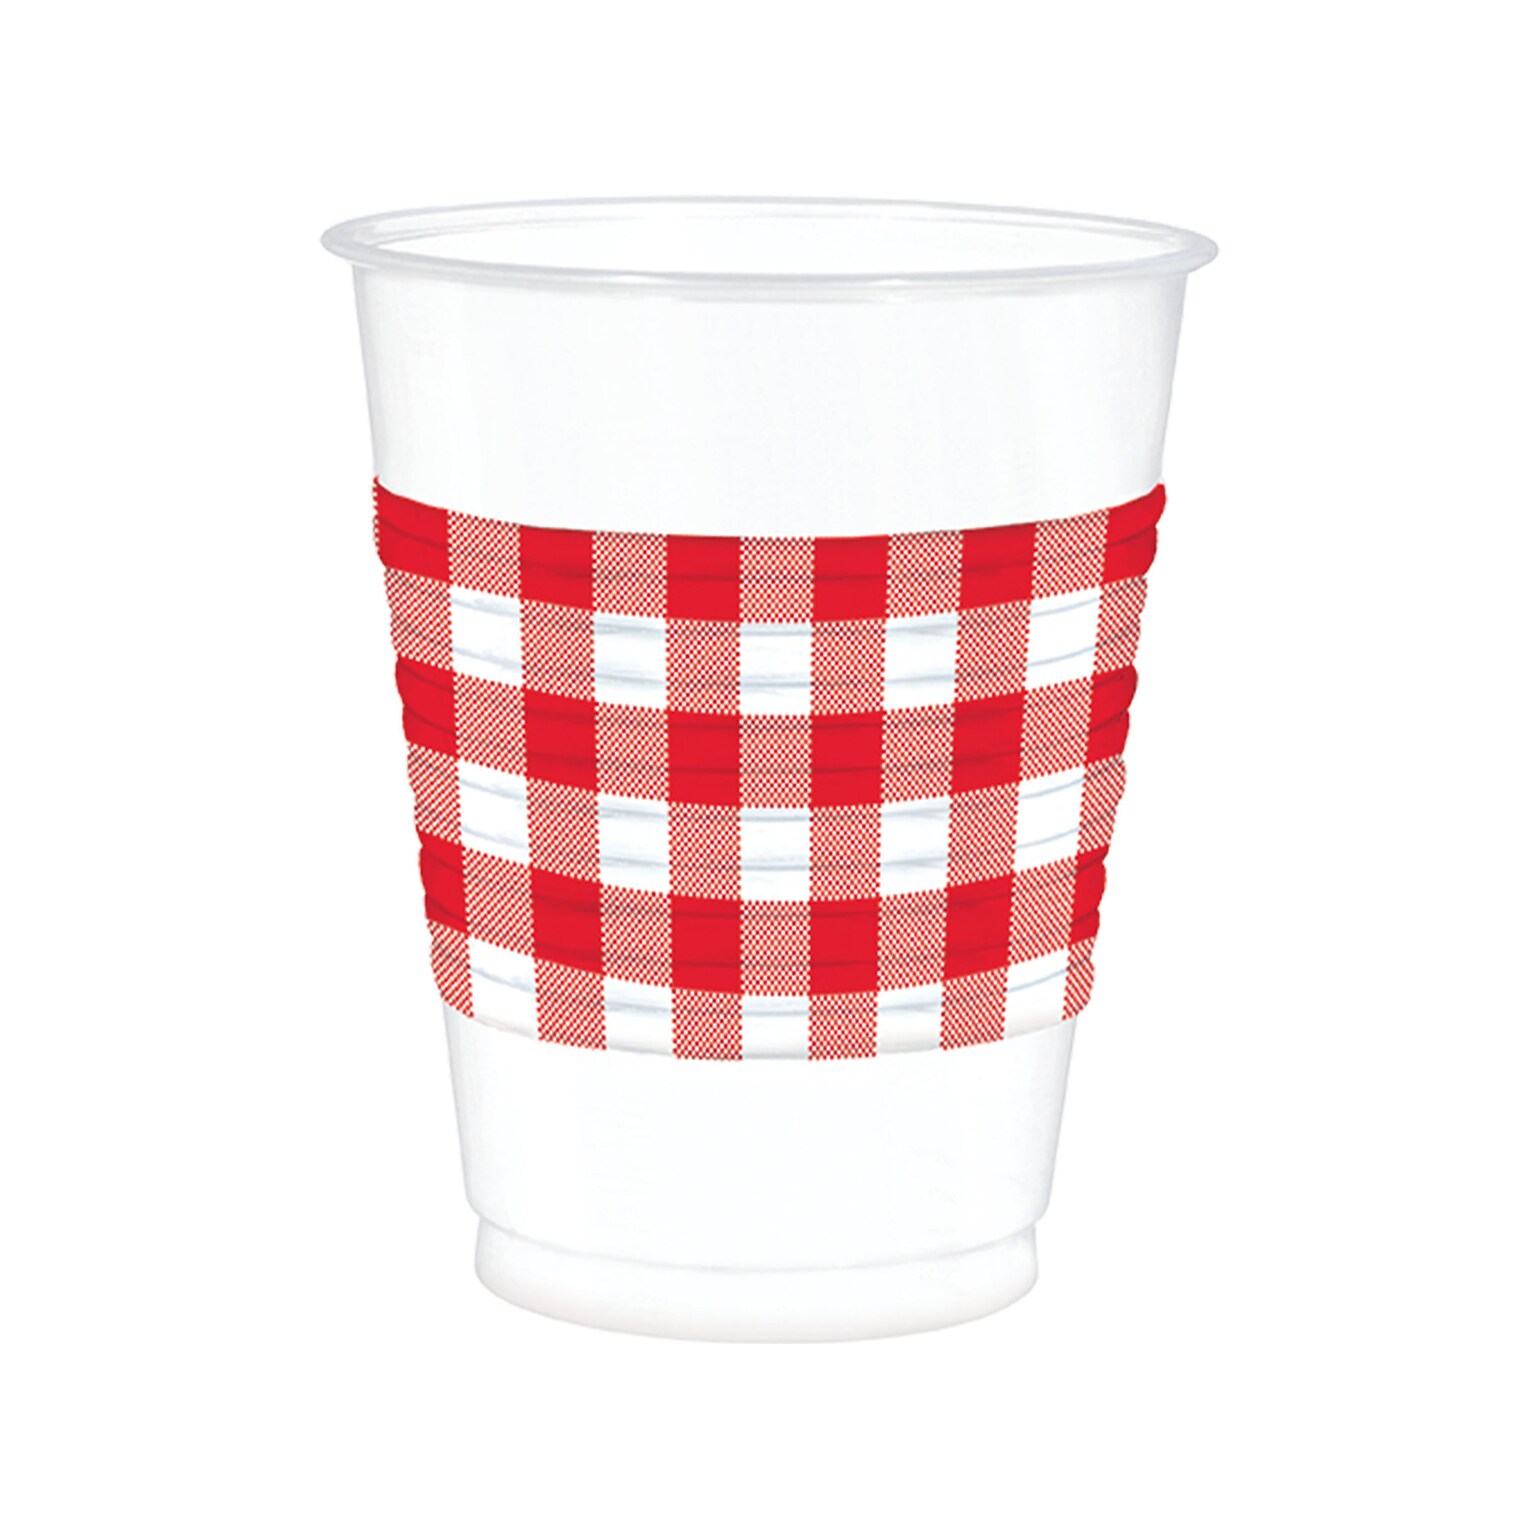 Amscan Summer/Luau Holiday Cup, White/Red, 25/Set, 2 Sets/Pack (420113)